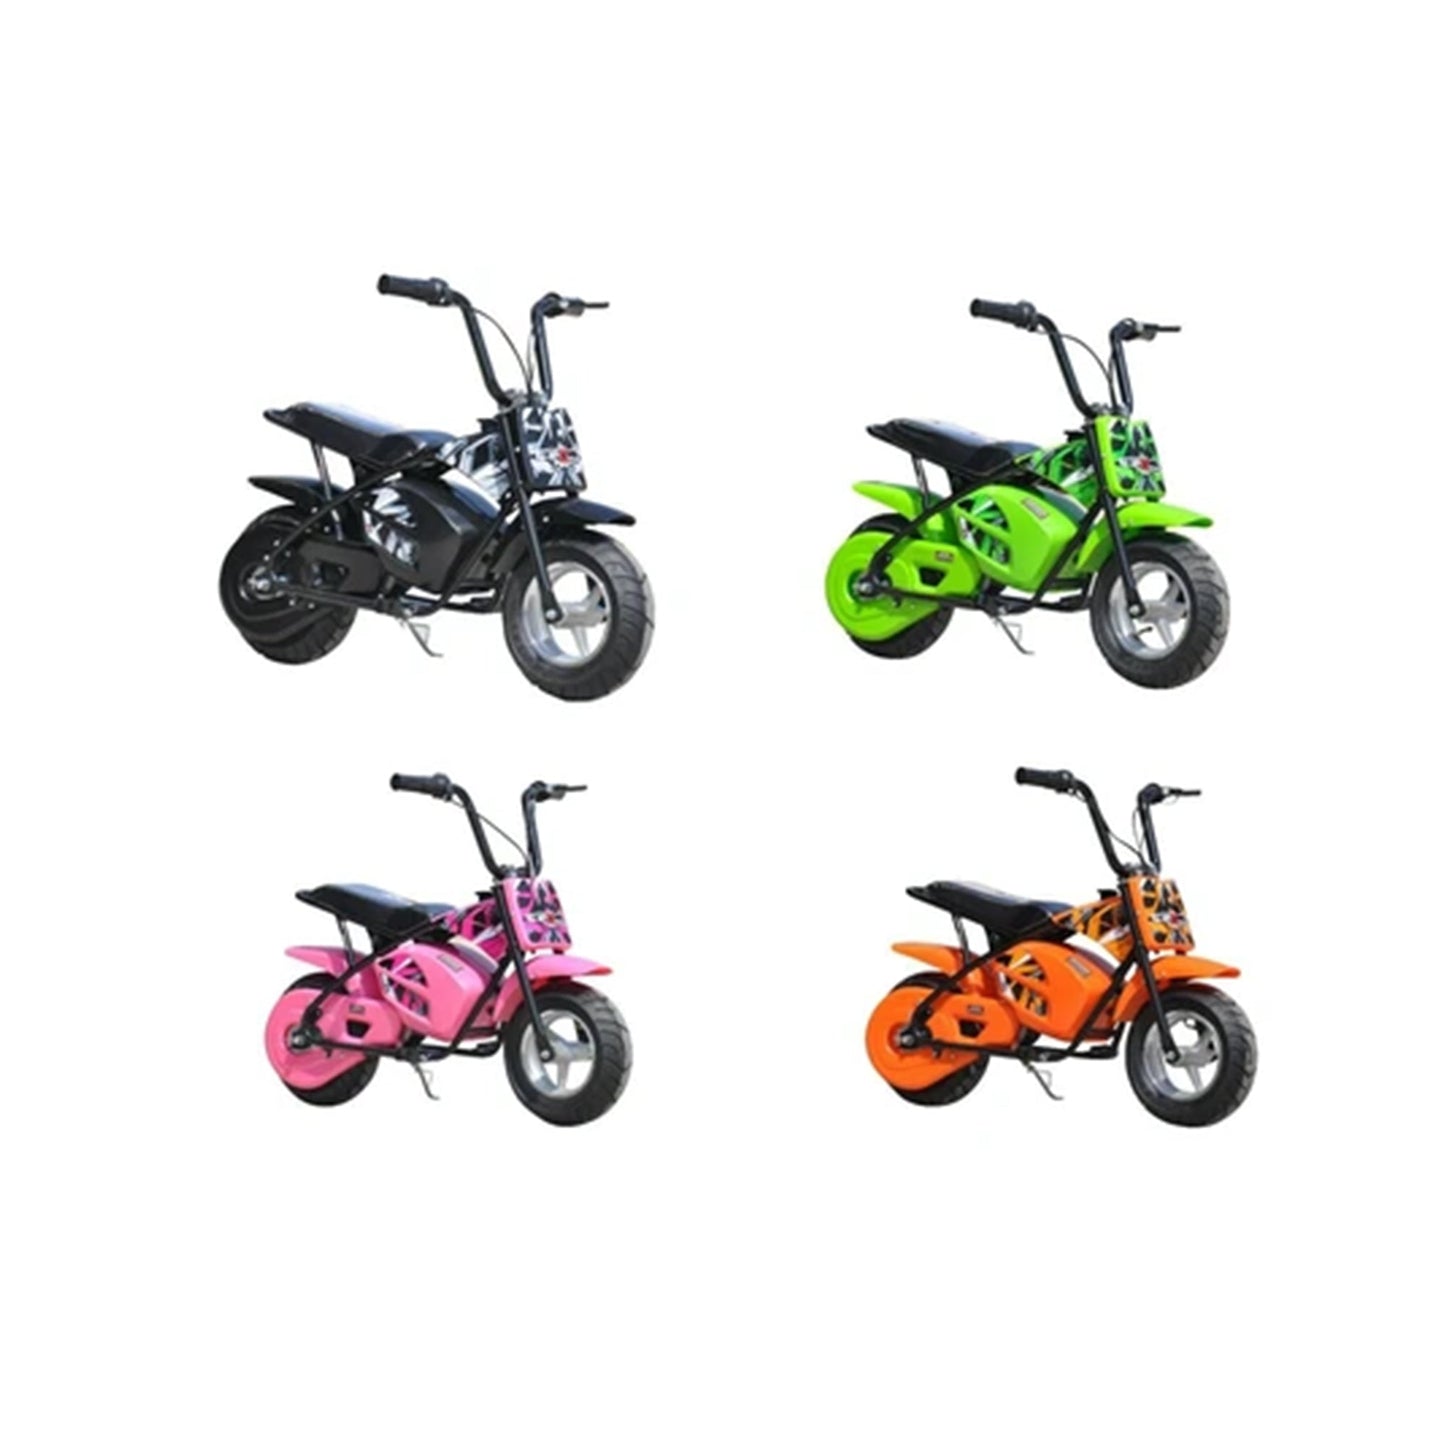 "Four bright-colored electric mini dirt bikes for kids on white background"